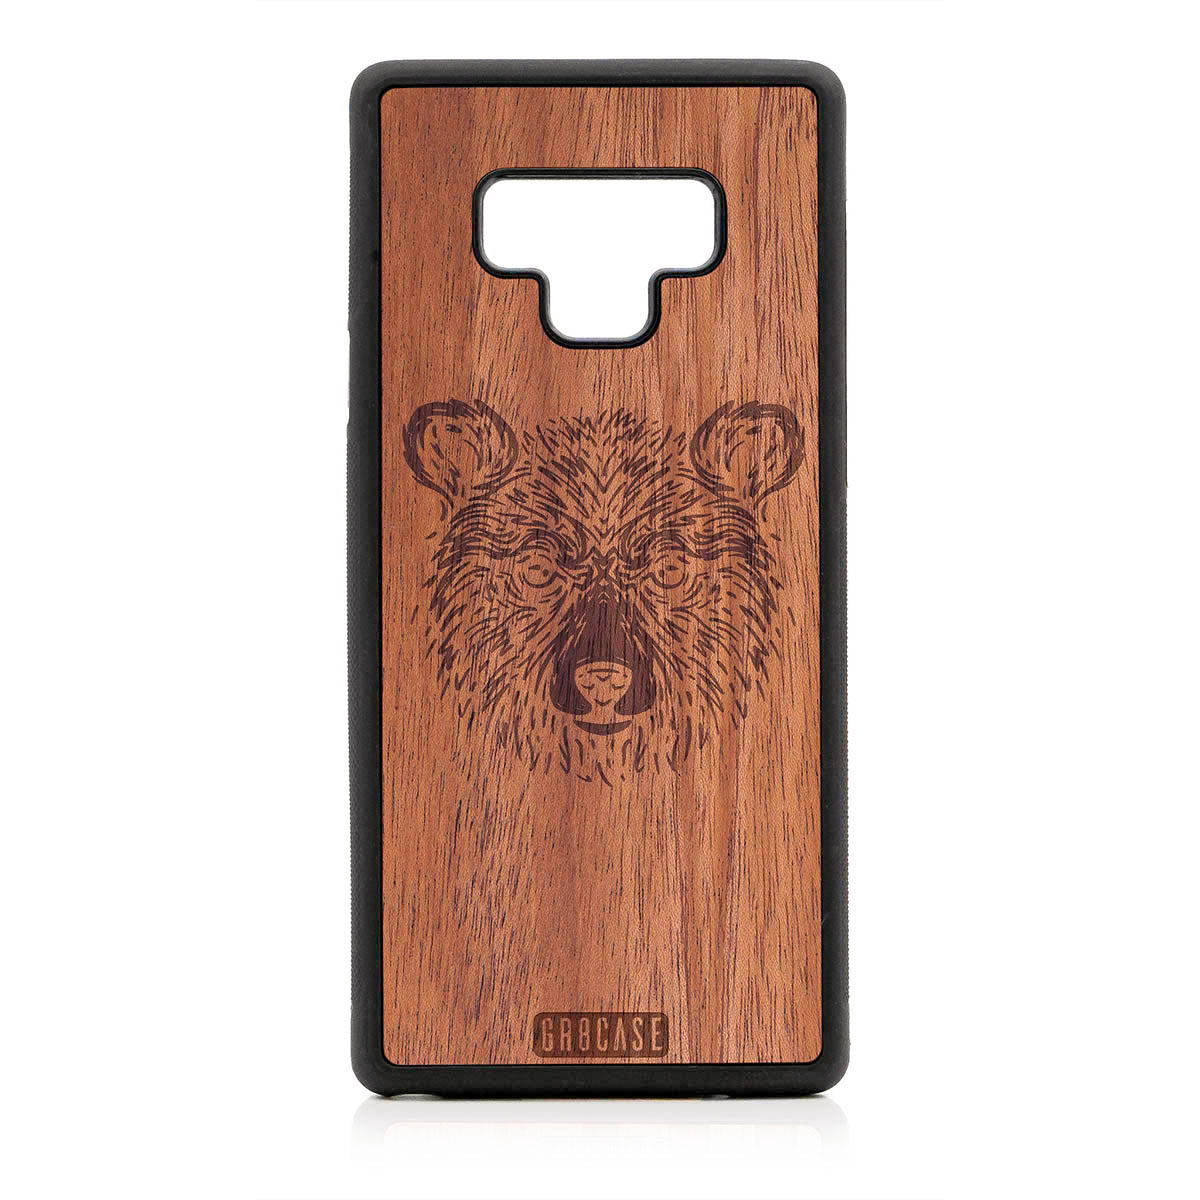 Furry Bear Design Wood Case For Samsung Galaxy Note 9